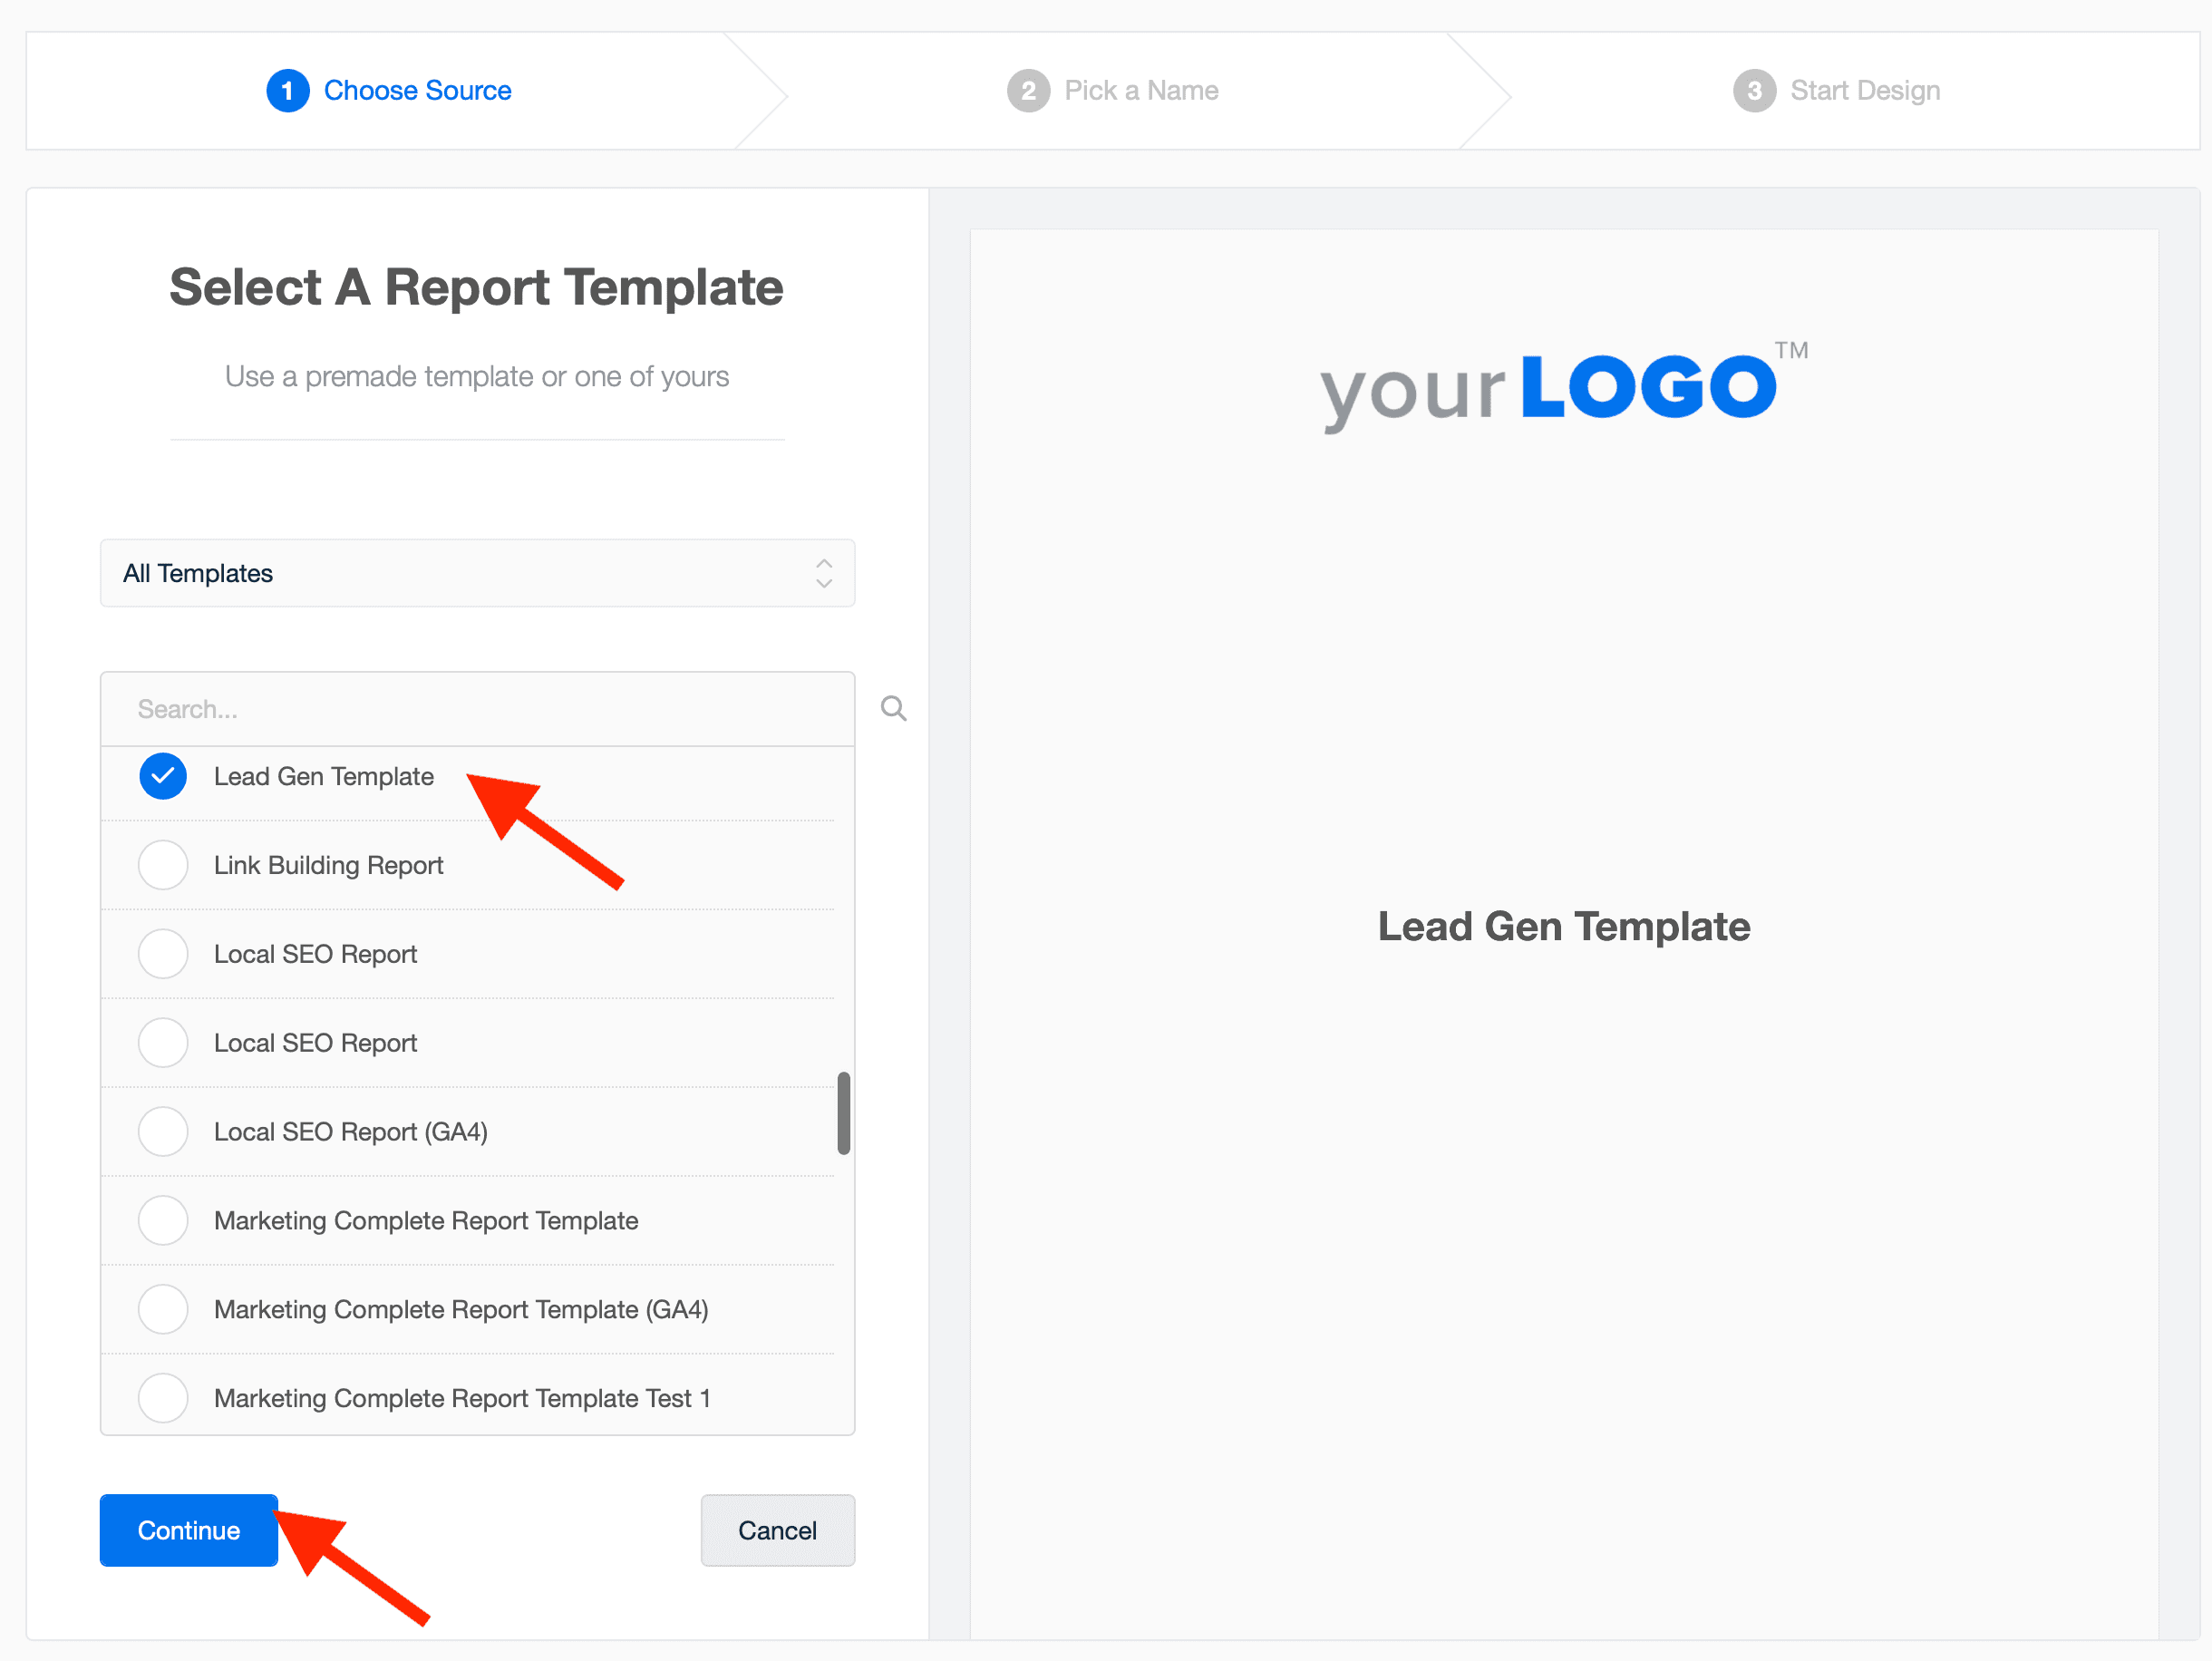 select your template from the drop-down menu